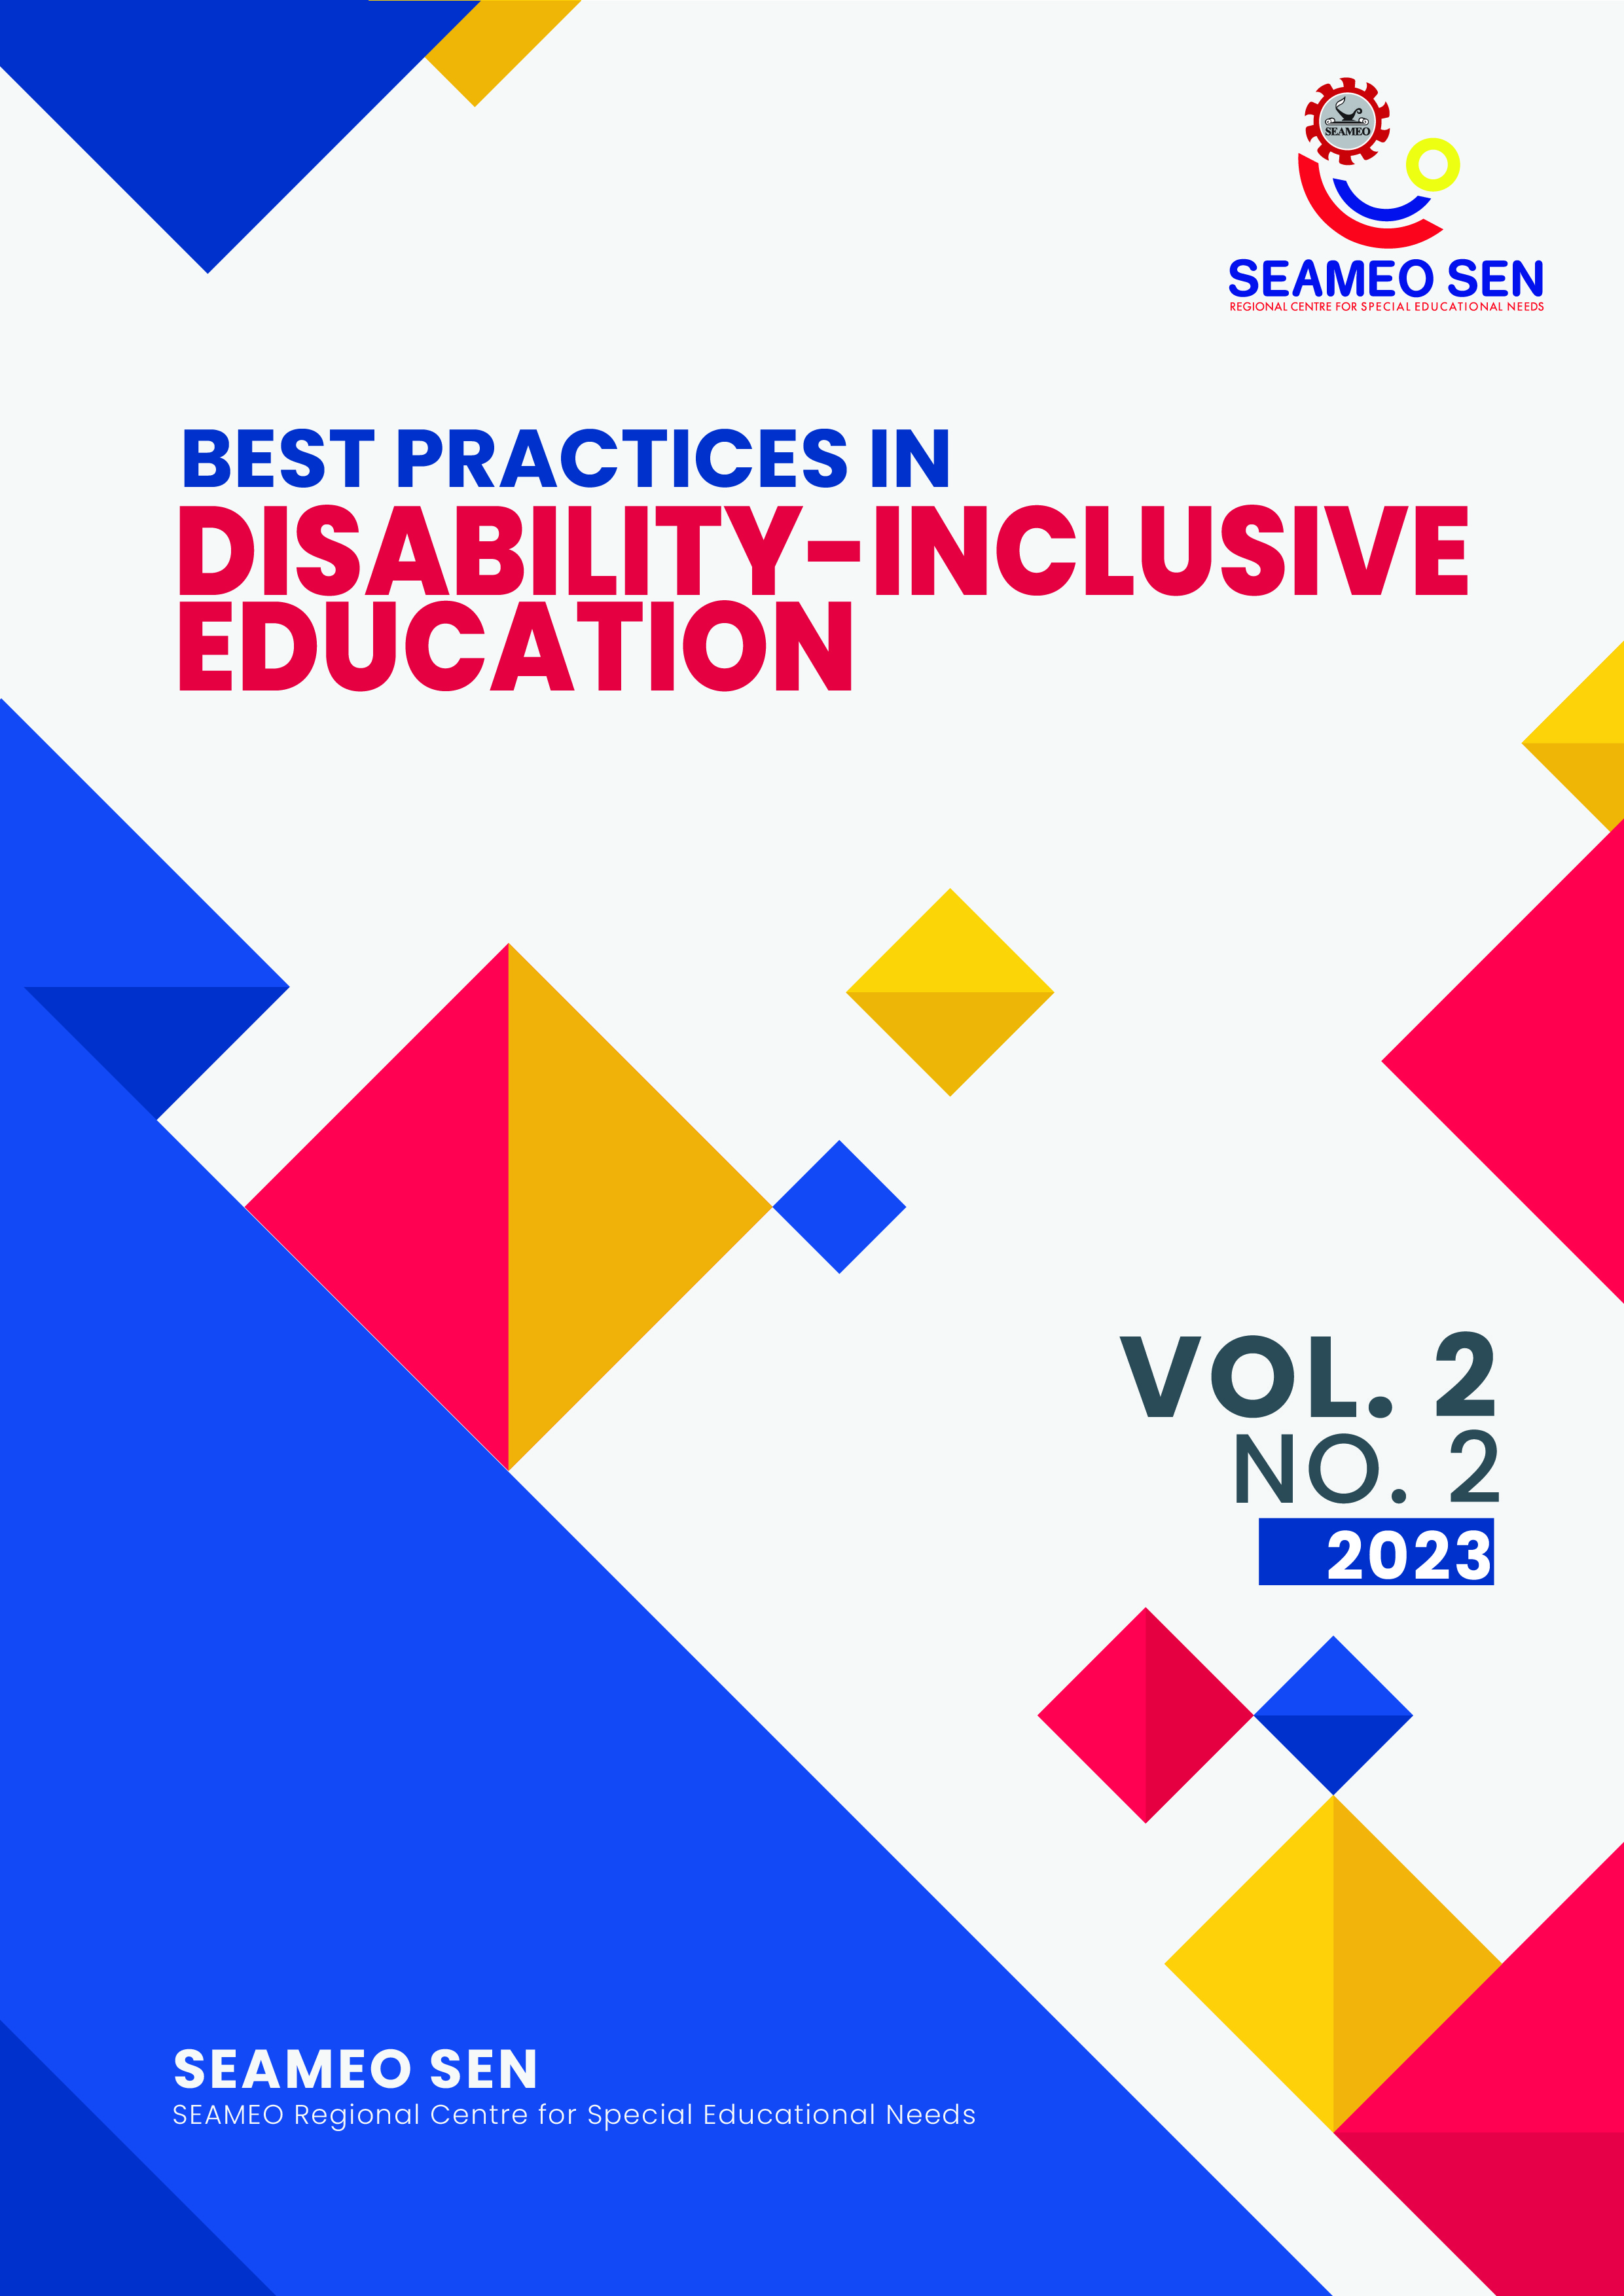 					View Vol. 2 No. 2 (2023): Best Practices in Disability-Inclusive Education
				